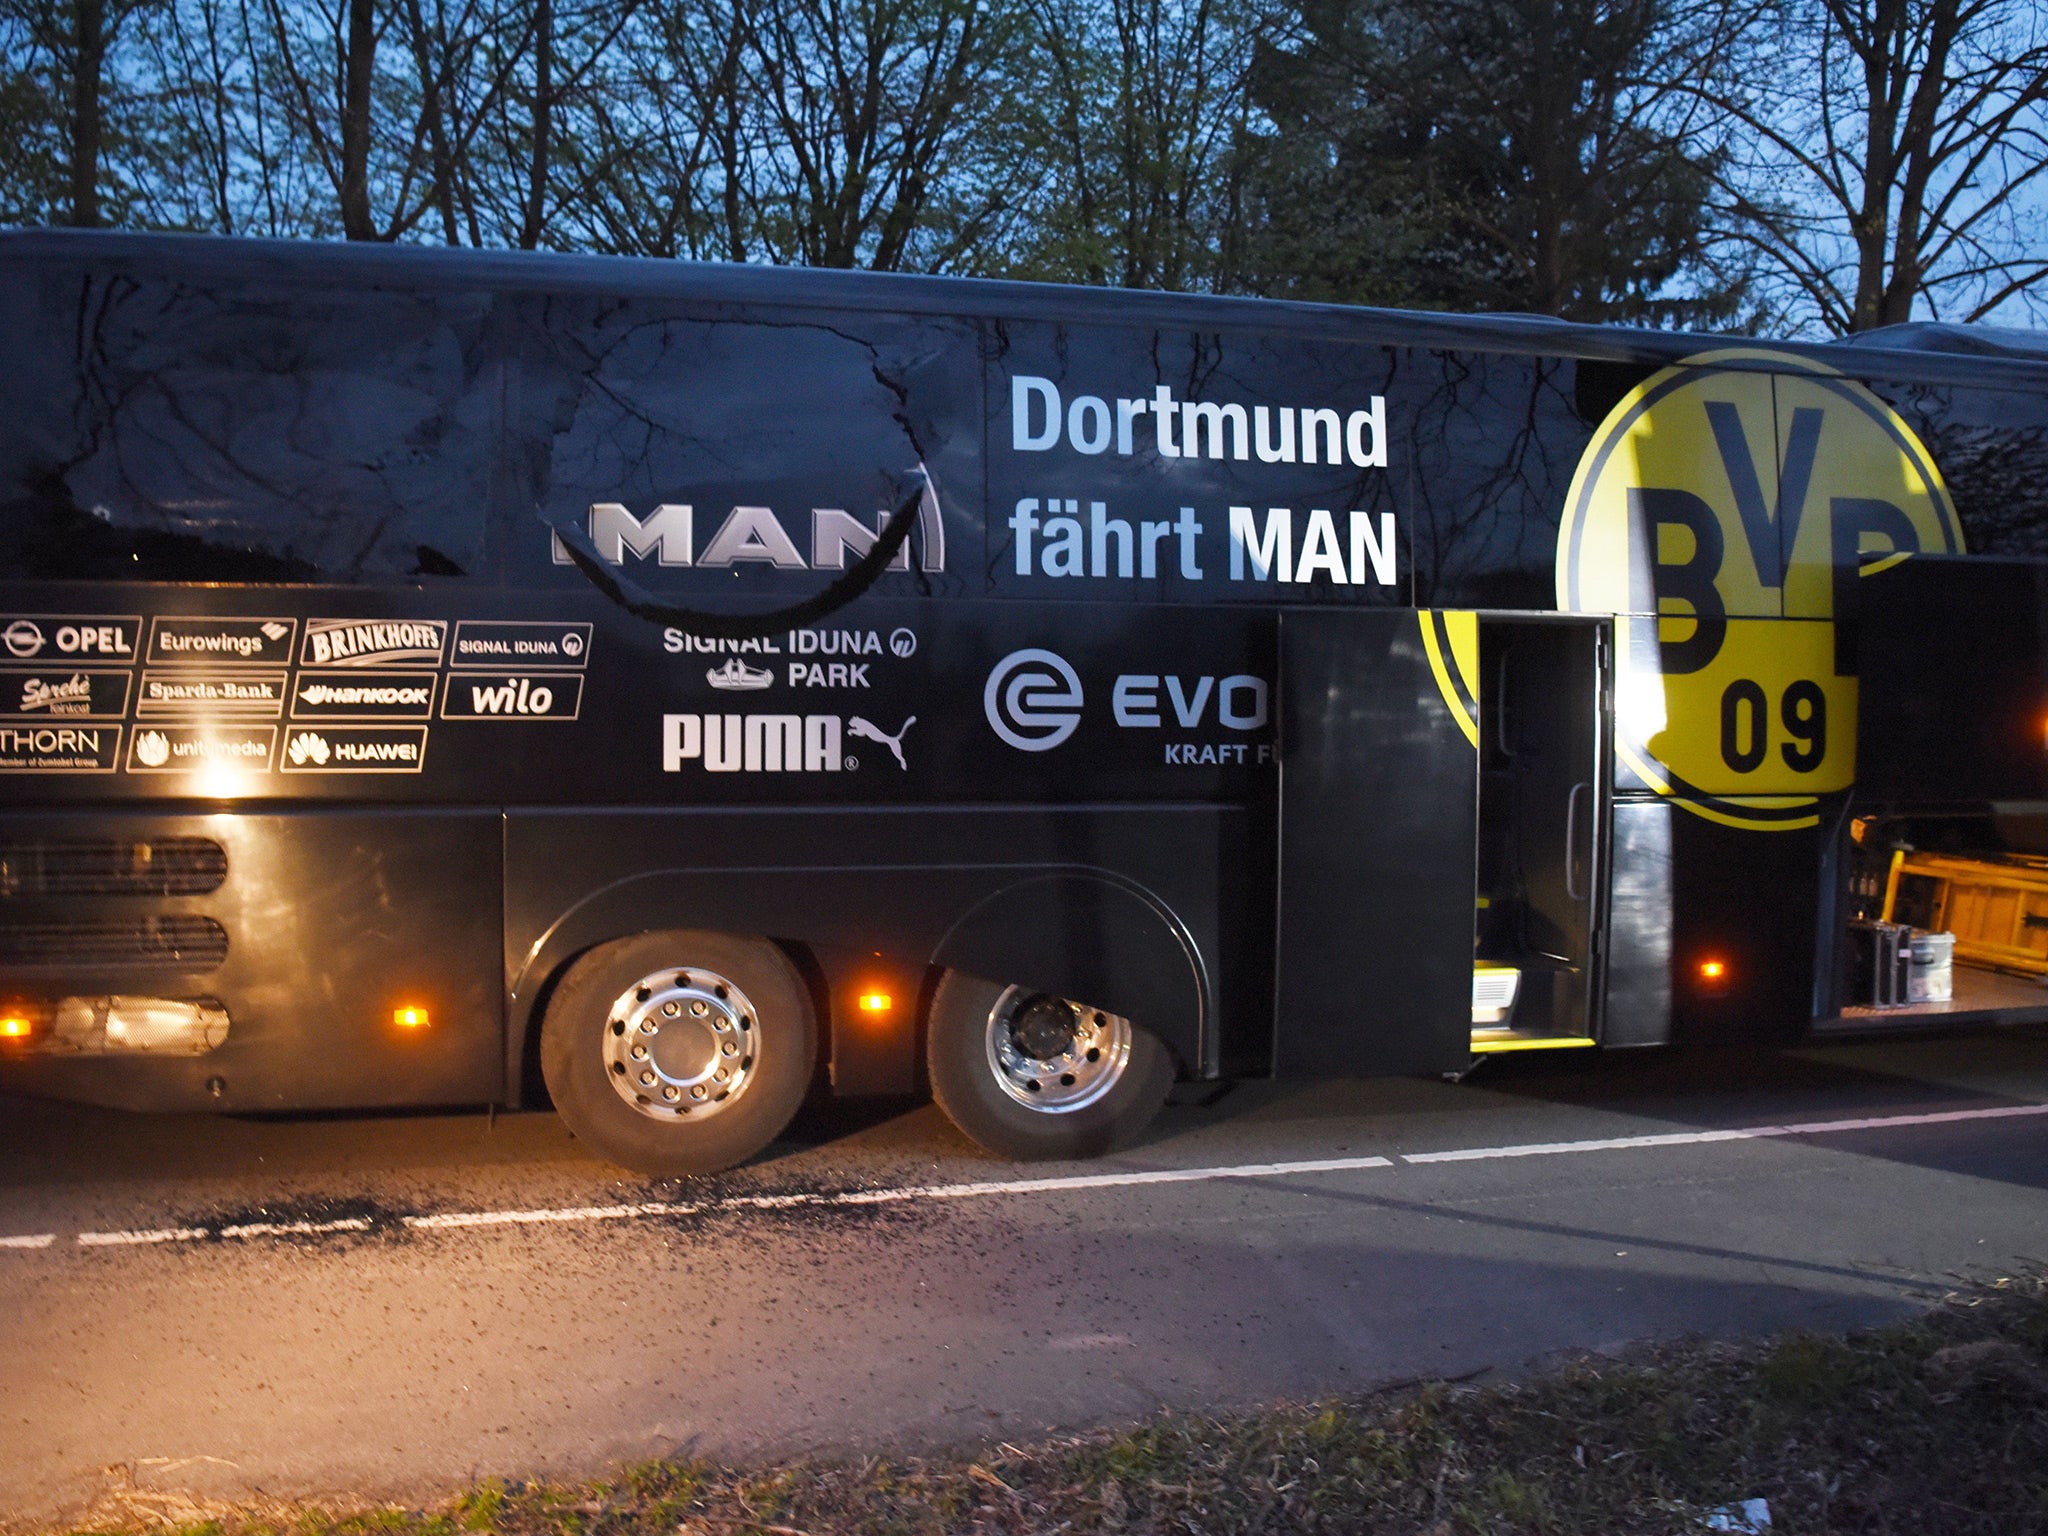 Three explosions went off nearby Dortmund's bus, shattering one window